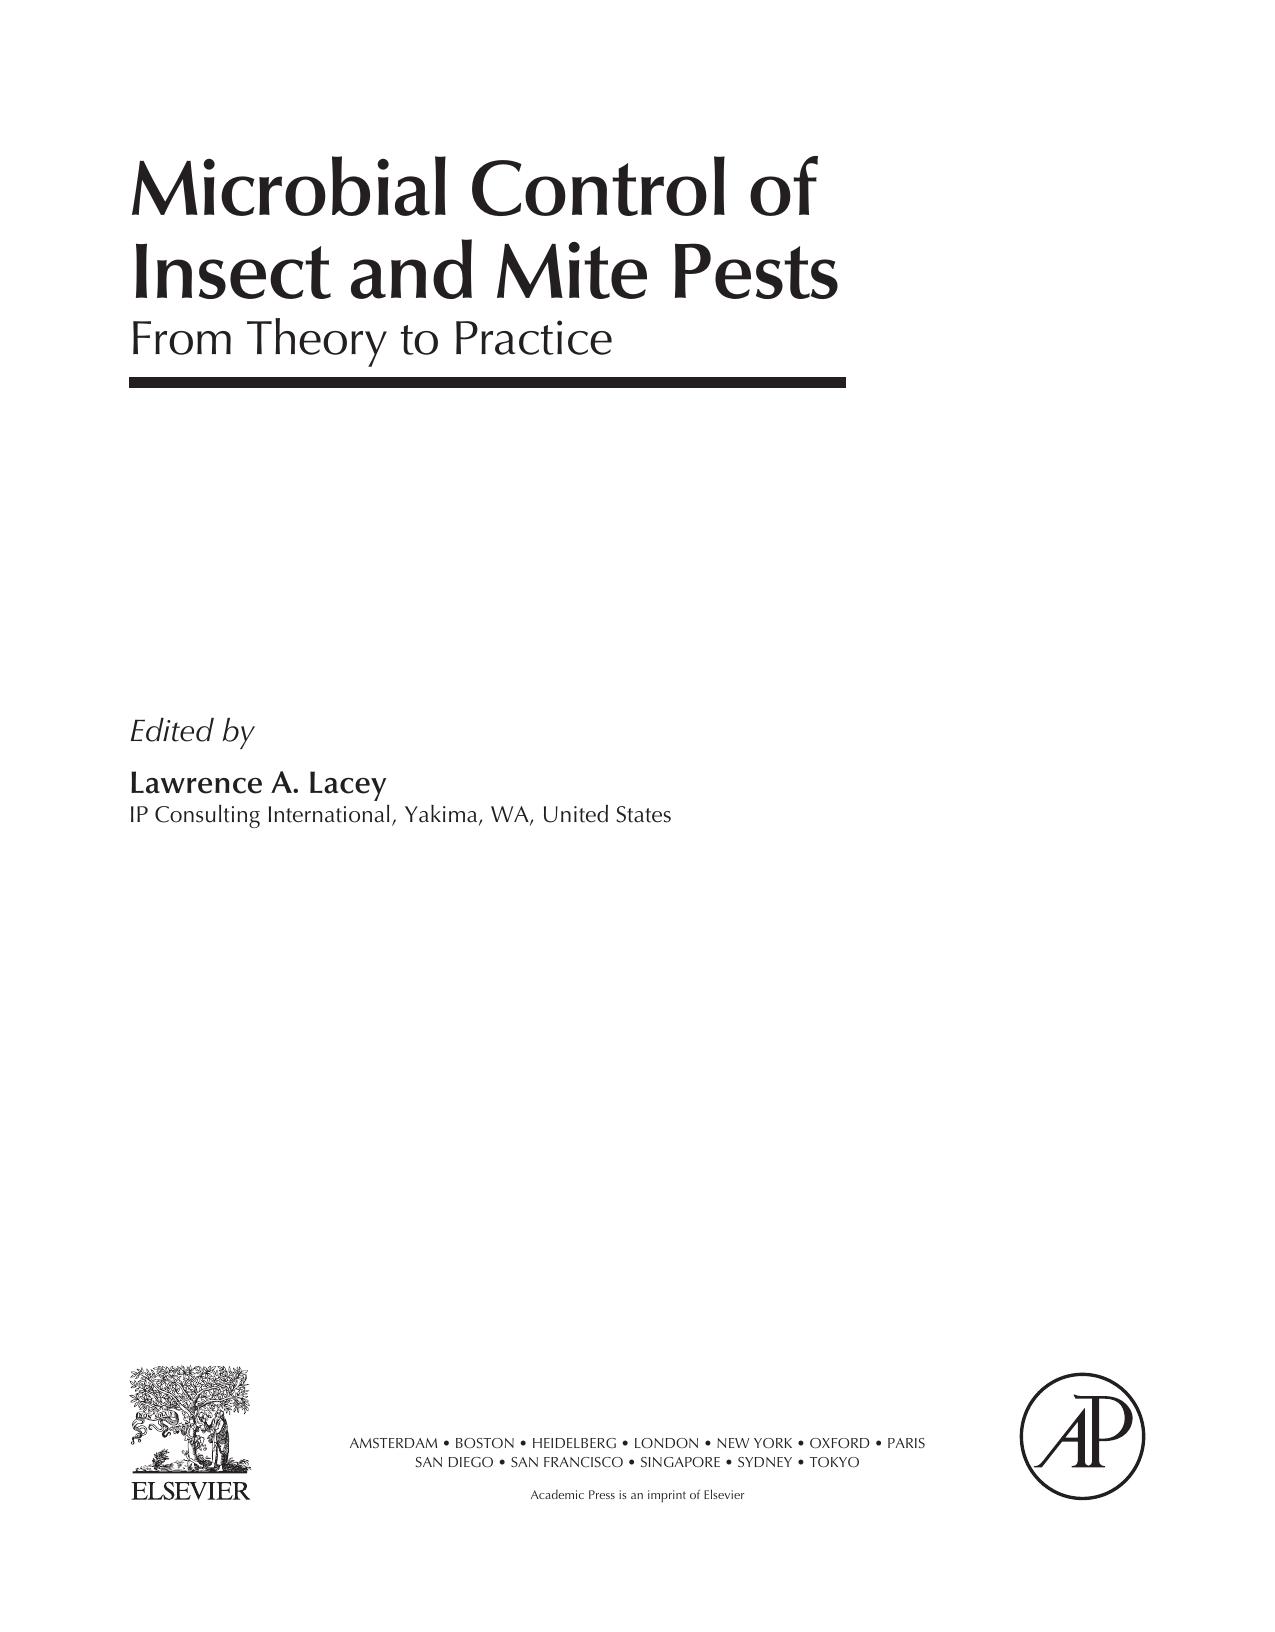 Microbial Control of Insect and Mite Pests. From Theory to Practice 2016